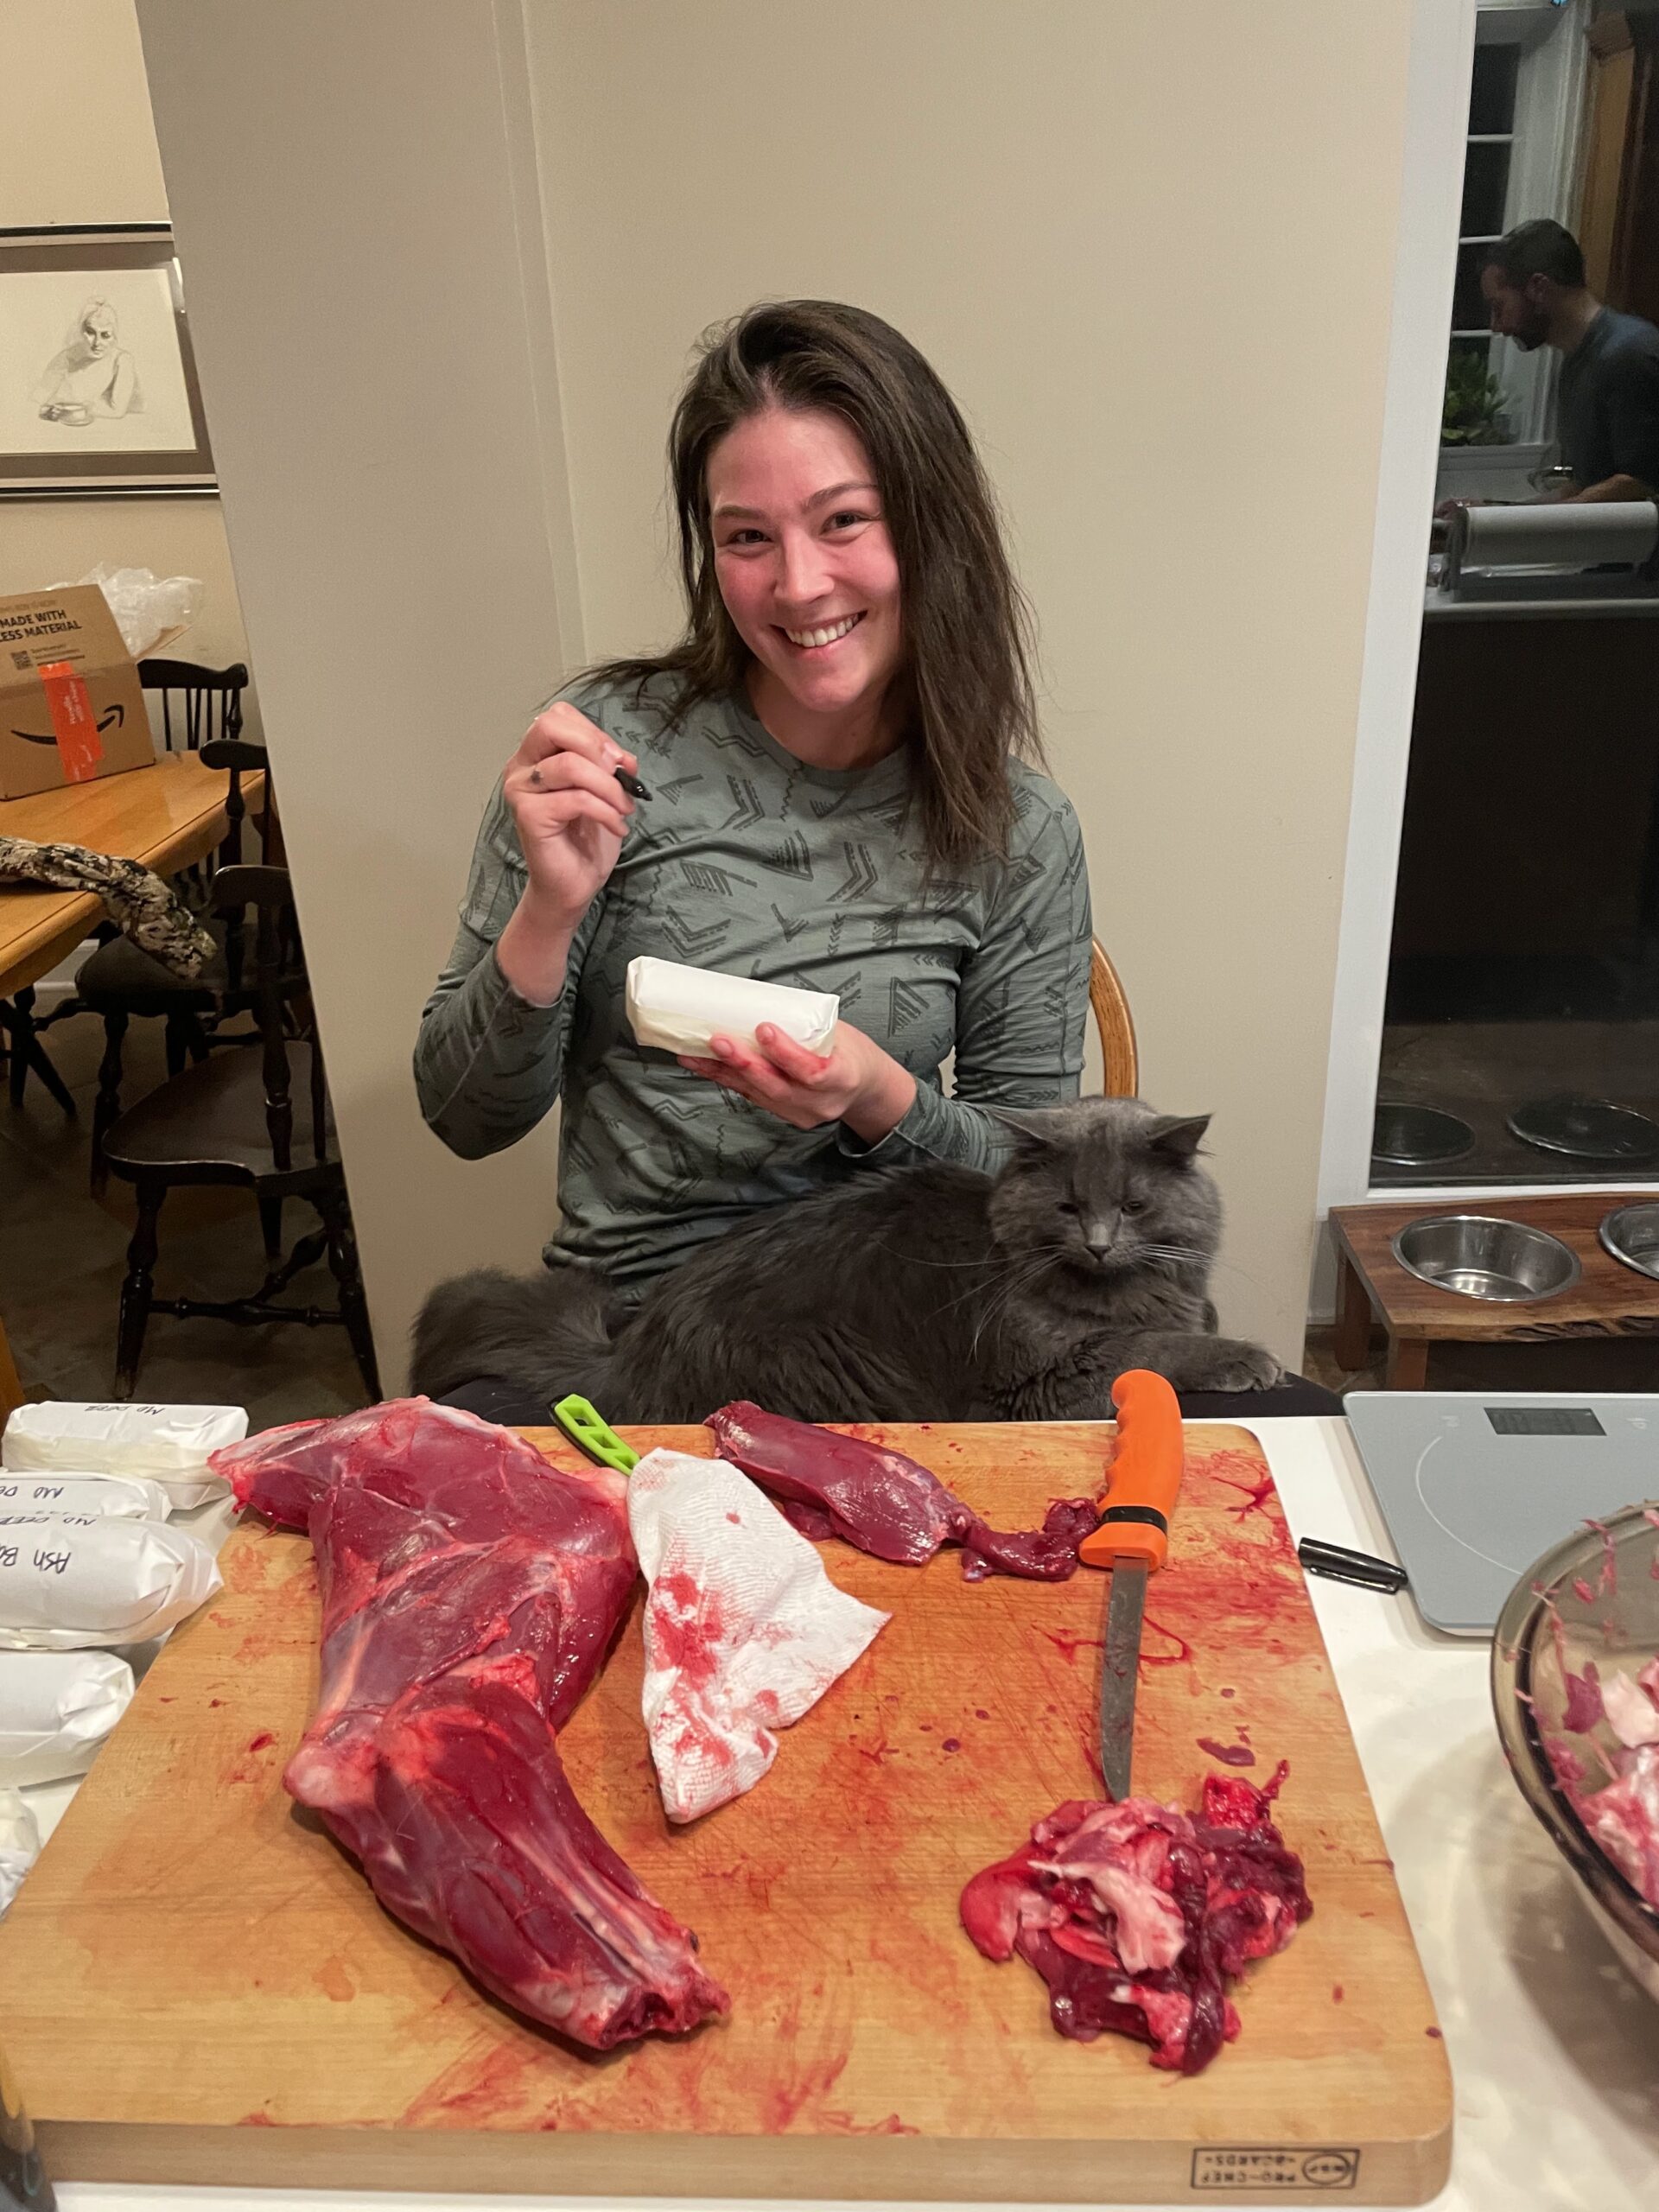 Fenrir the cat assists Thess in labeling cuts of meat for the freezer.